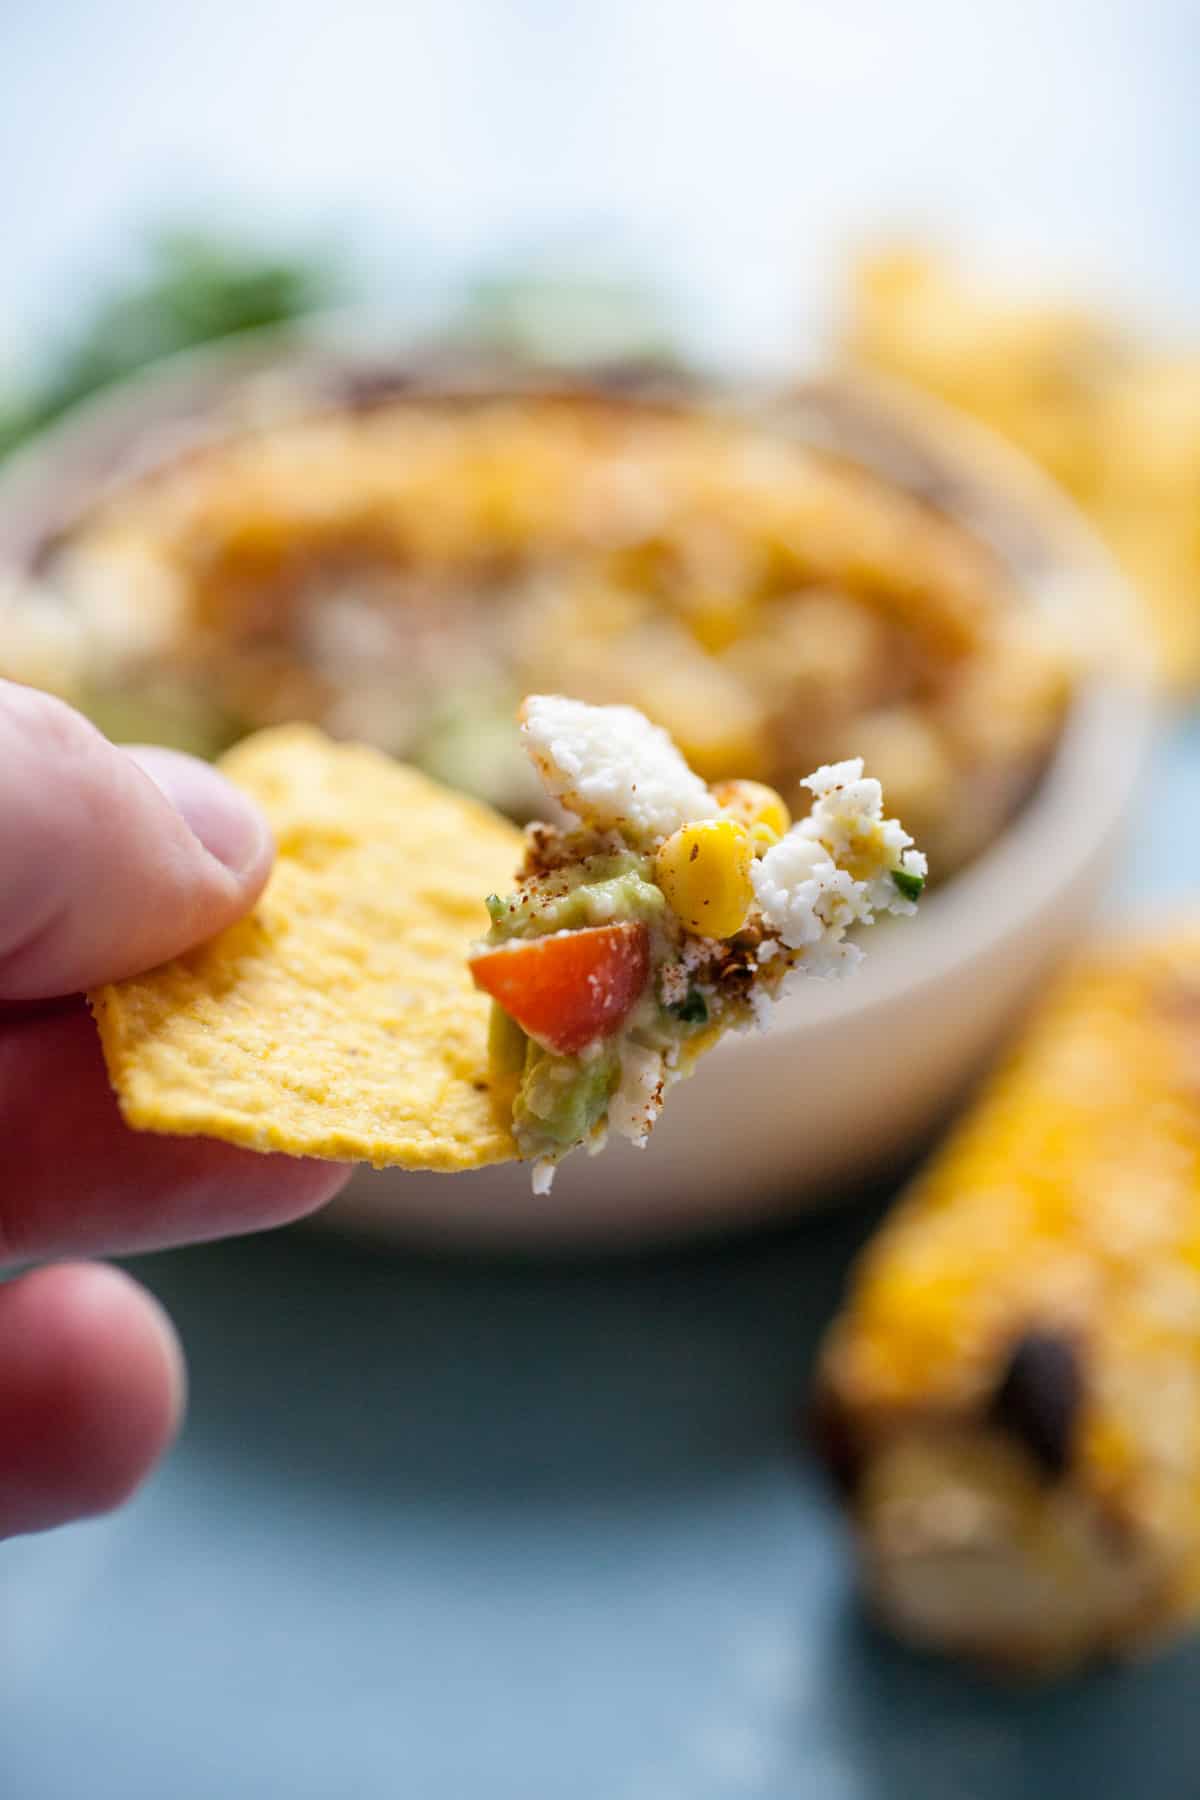 Street Corn Guacamole: Homemade guacamole mixed with a few simple, but perfect add-ins that mimic Mexican street corn (elote)! Roasted corn, cotija cheese, chili powder, cilantro, and a few other goodies. Perfect for a party! | macheesmo.com